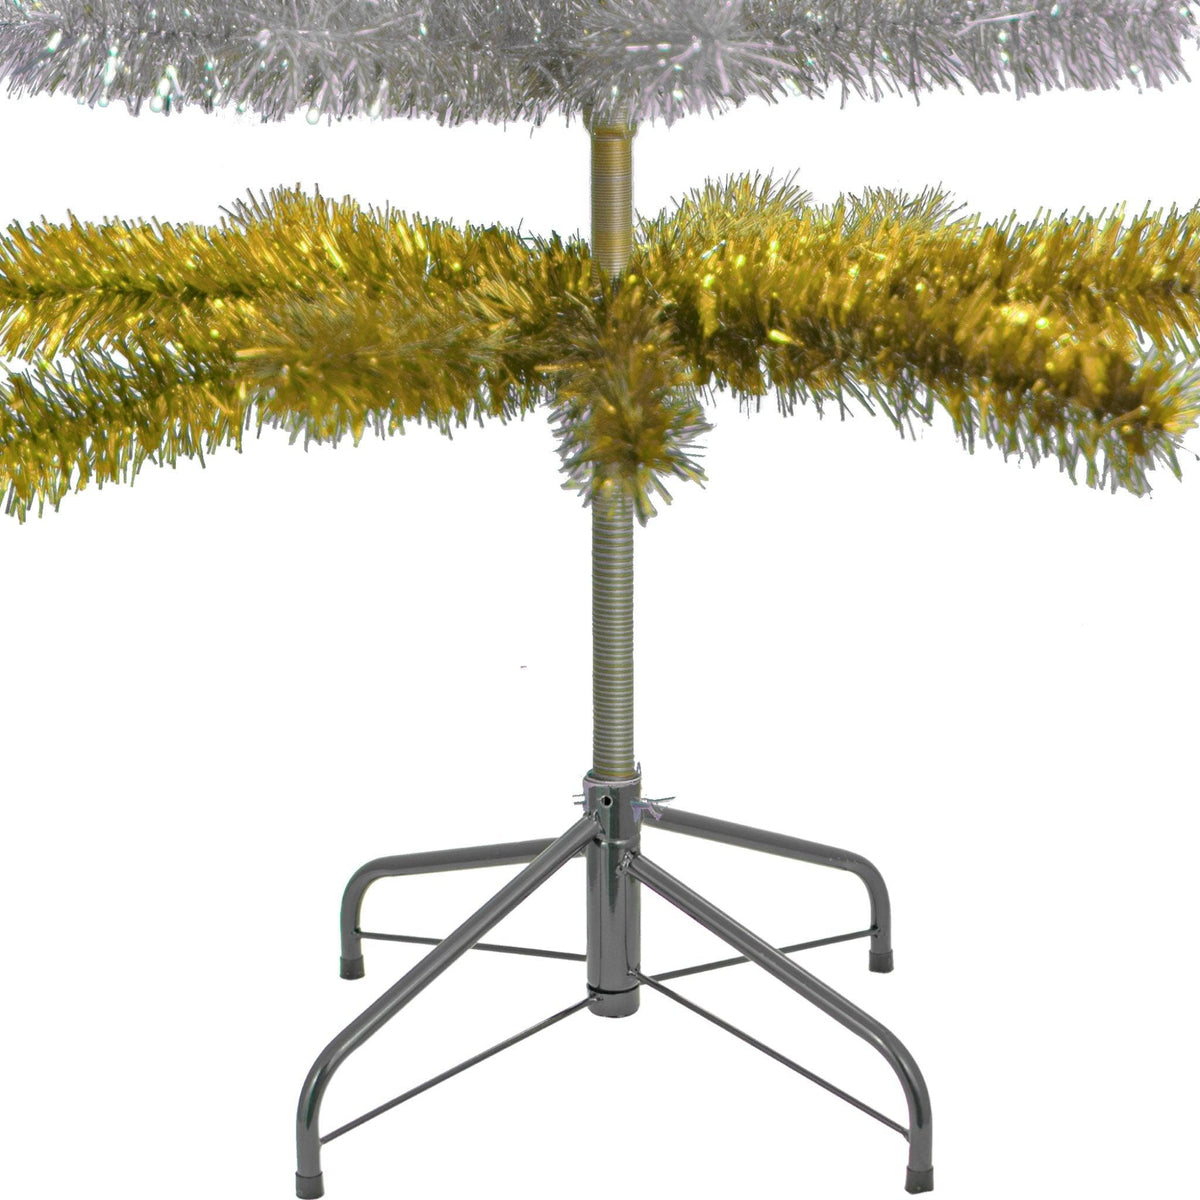 60in tall Shiny Gold and Metallic Silver Layered Tinsel Christmas Trees on sale at leedisplay.com